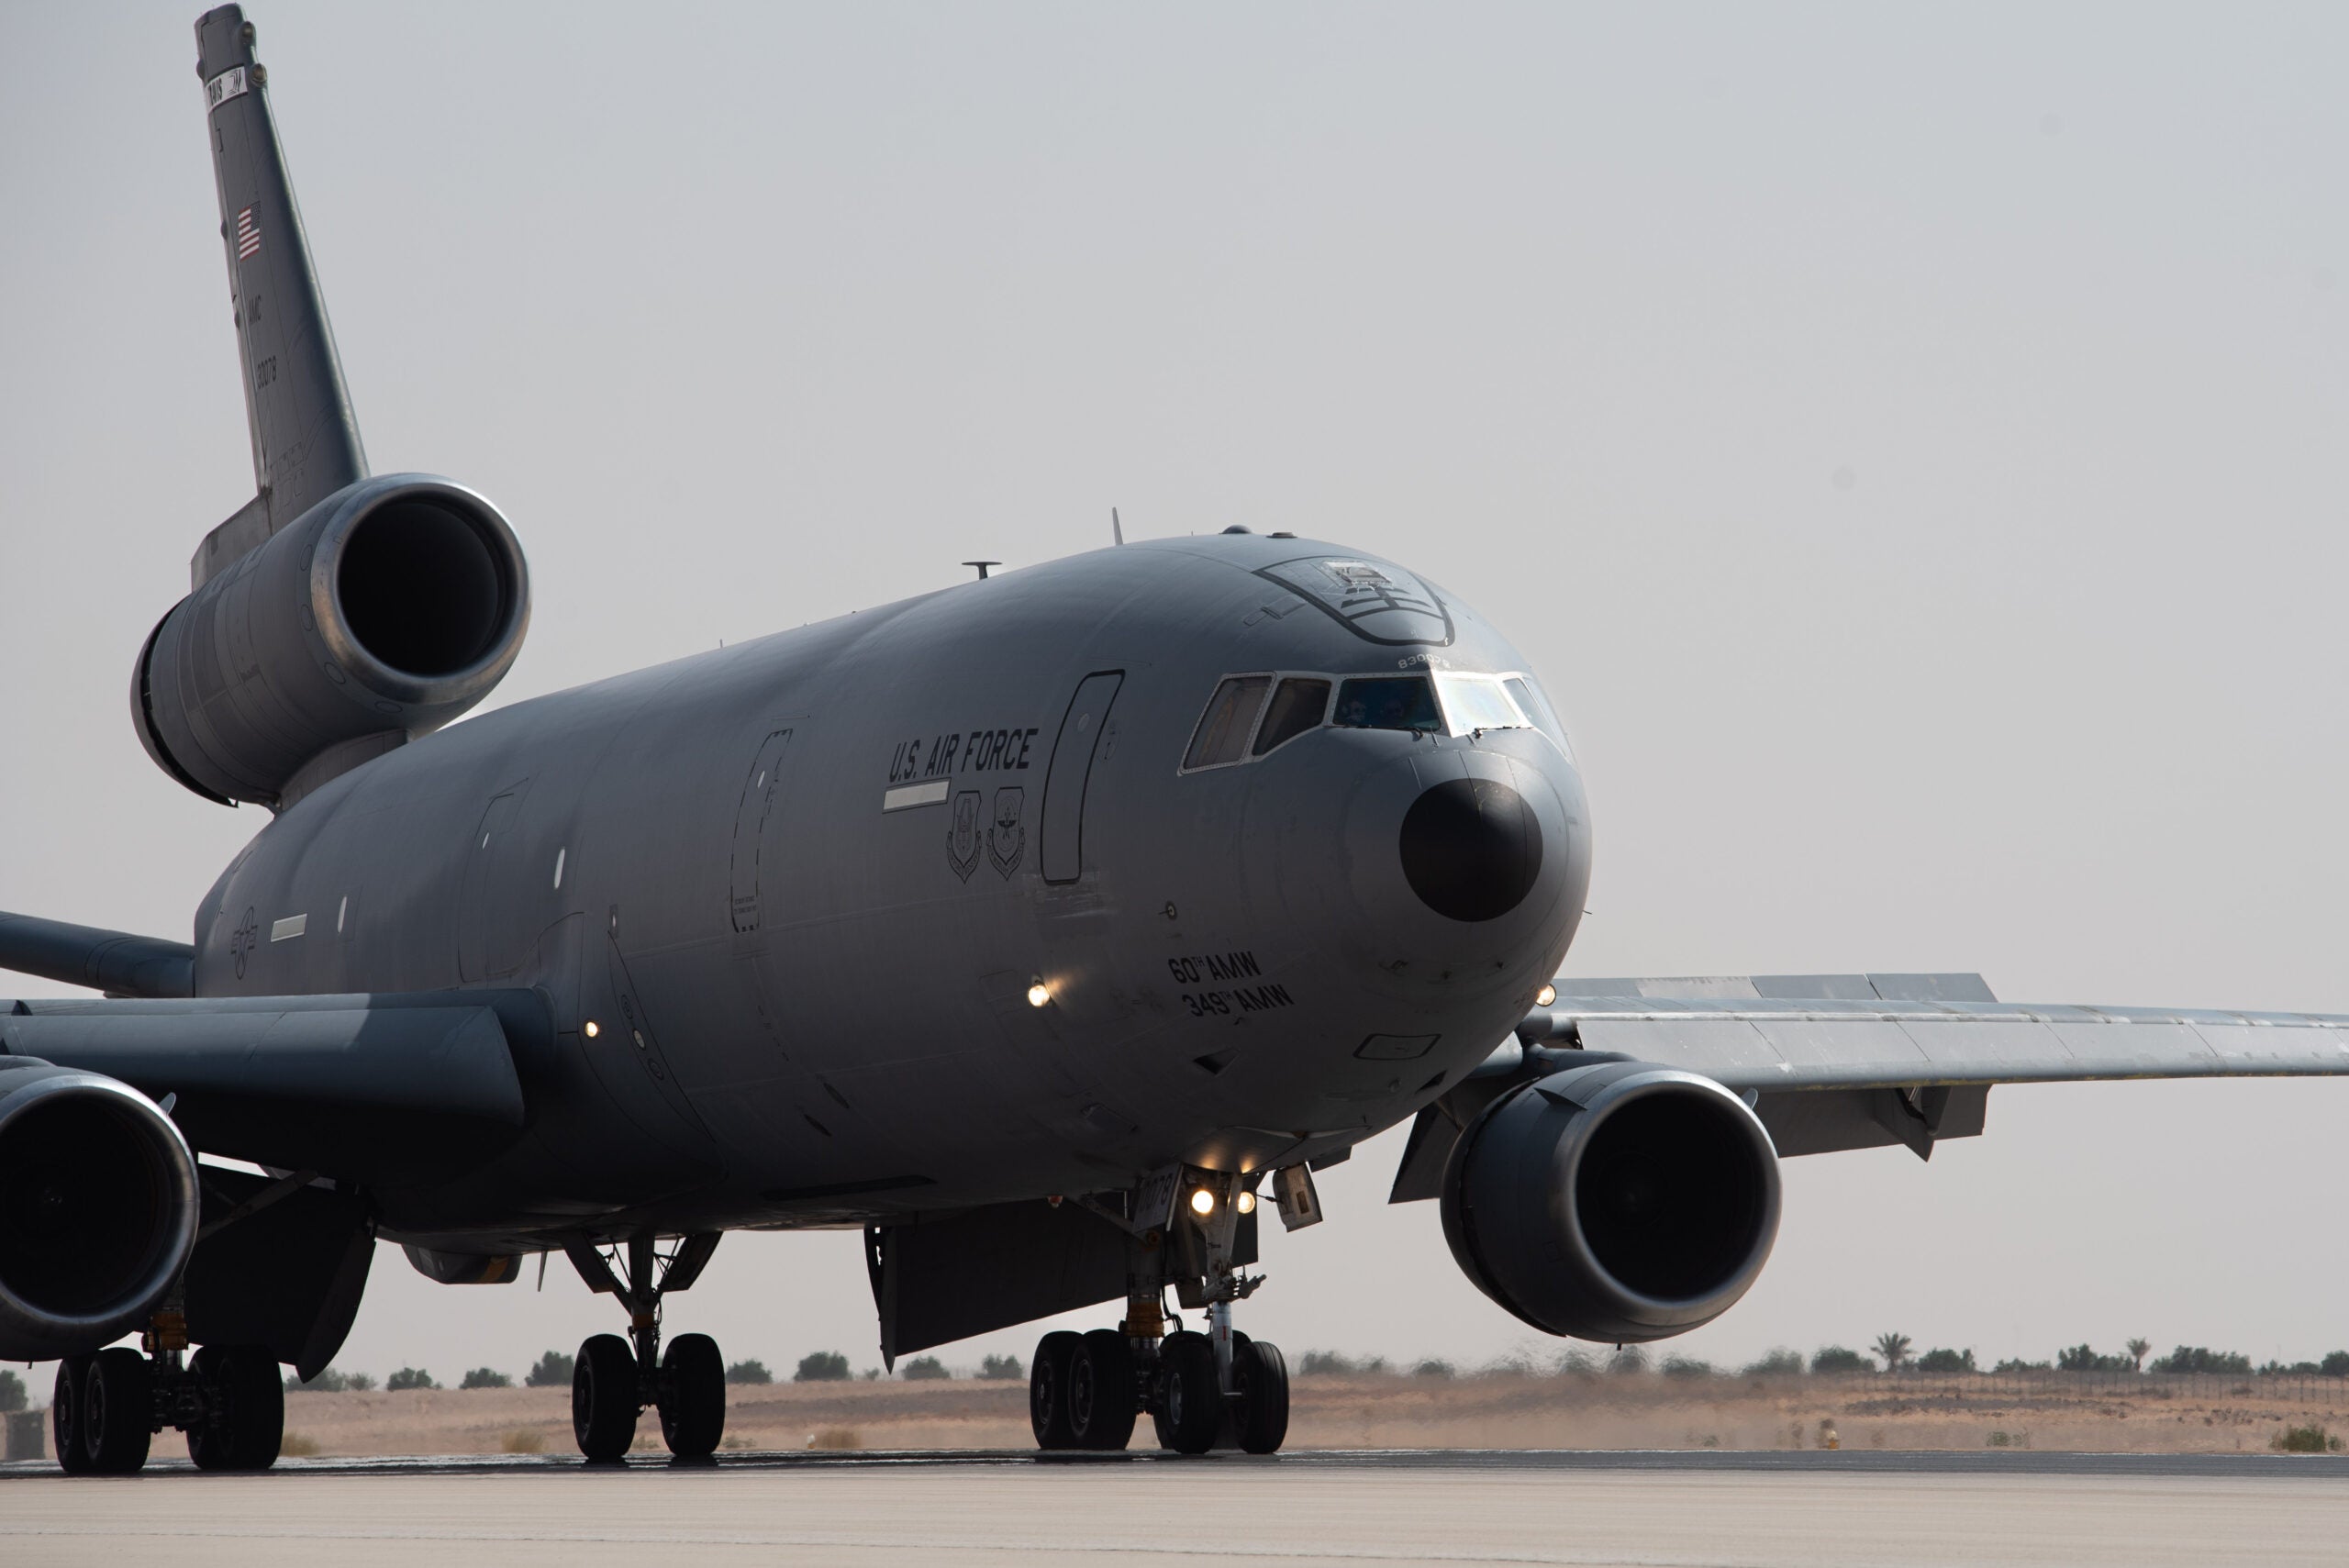 A KC-10 Extender assigned to the 908th Air Refueling Squadron lands after conducting the airframe's final combat sortie before inactivation at Prince Sultan Air Base, Kingdom of Saudi Arabia, Oct. 3, 2023. The flight served as a capstone for the KC-10 after over 30 years of service within the U.S. Air Forces Central (AFCENT) Area of Responsibility. By September 2024, the U.S. Air Force's fleet of KC-10s will be decommissioned and gradually replaced by the KC-46 aircraft. (U.S. Air Force photo by Tech. Sgt. Alexander Frank)